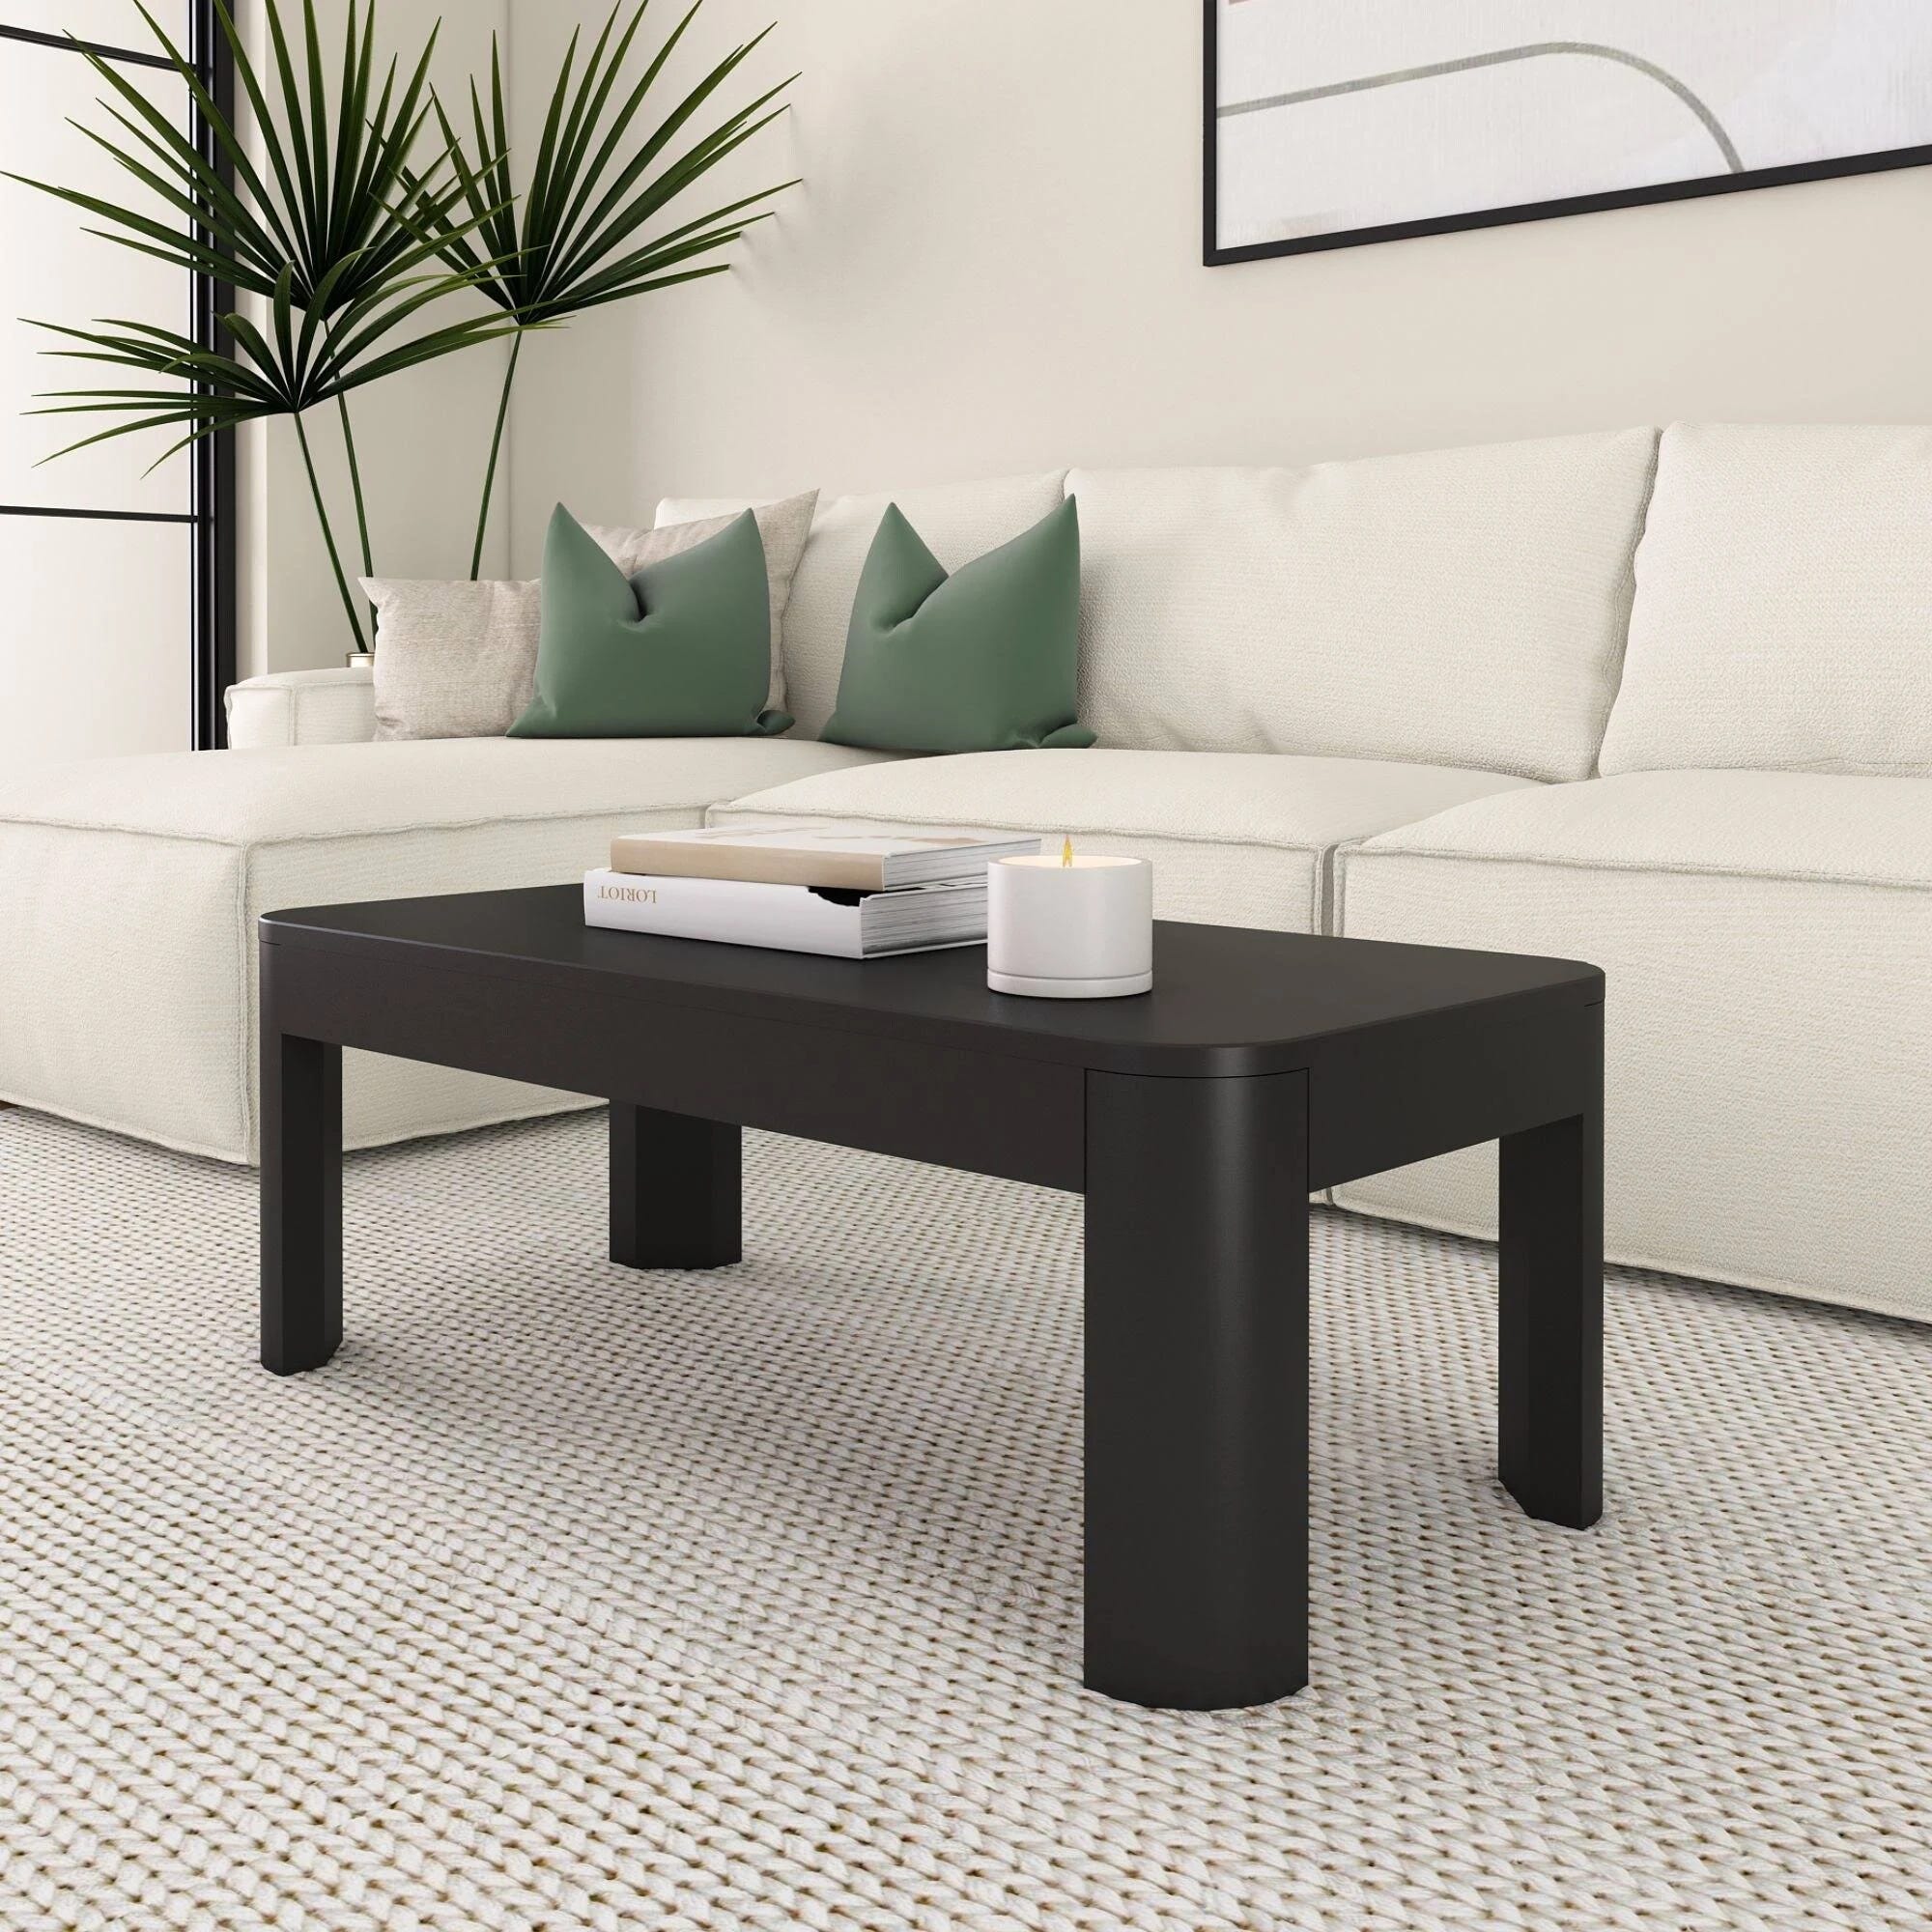 Contemporary Rectangular Coffee Table with Modern Design | Image